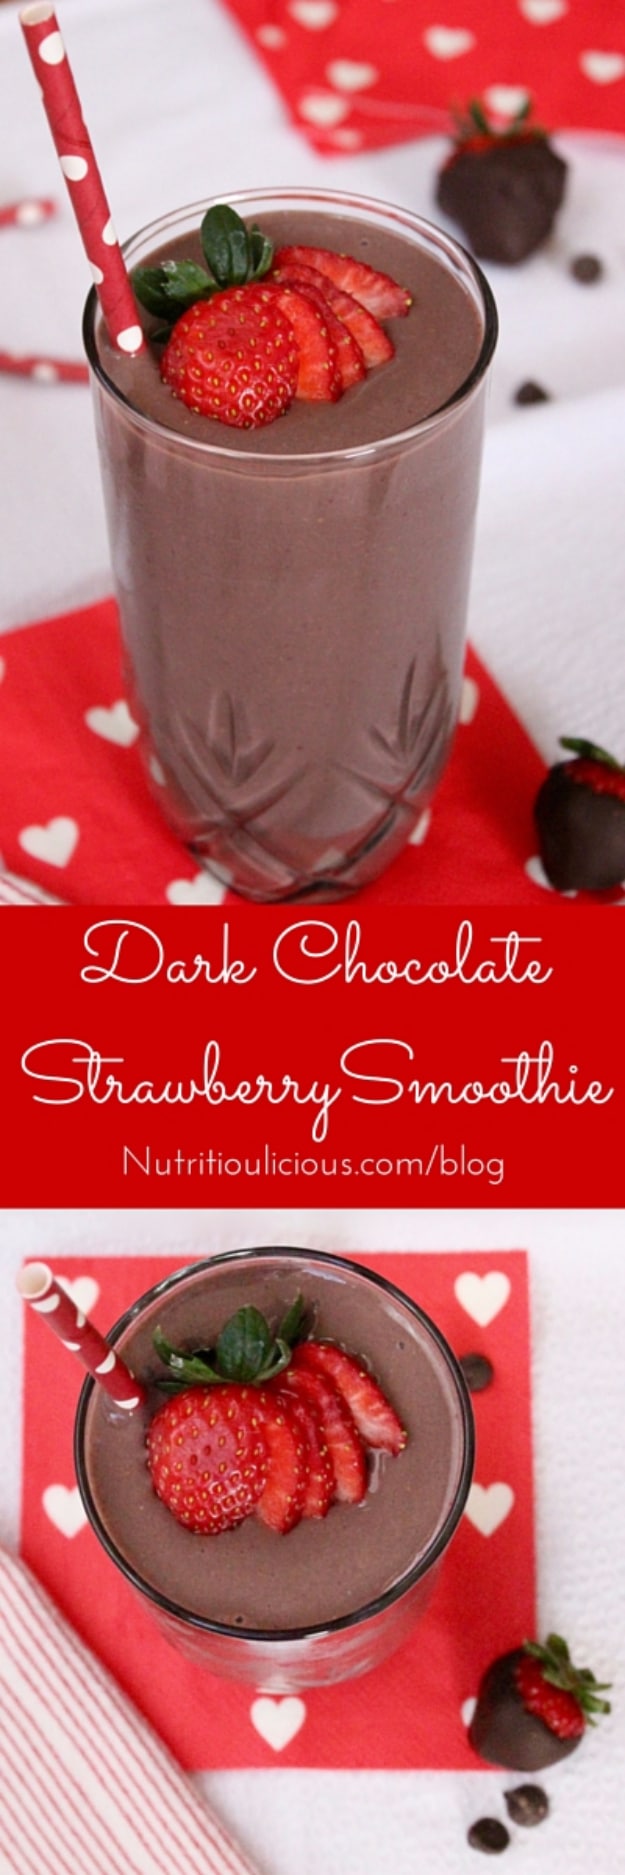 Healthy Smoothie Recipes - Dark Chocolate Strawberry Smoothie - Easy ideas perfect for breakfast, energy. Low calorie and high protein recipes for weightloss and to lose weight. Simple homemade recipe ideas that kids love. Quick EASY morning recipes before work and school, after workout #smoothies #healthy #smoothie #healthyrecipes #recipes